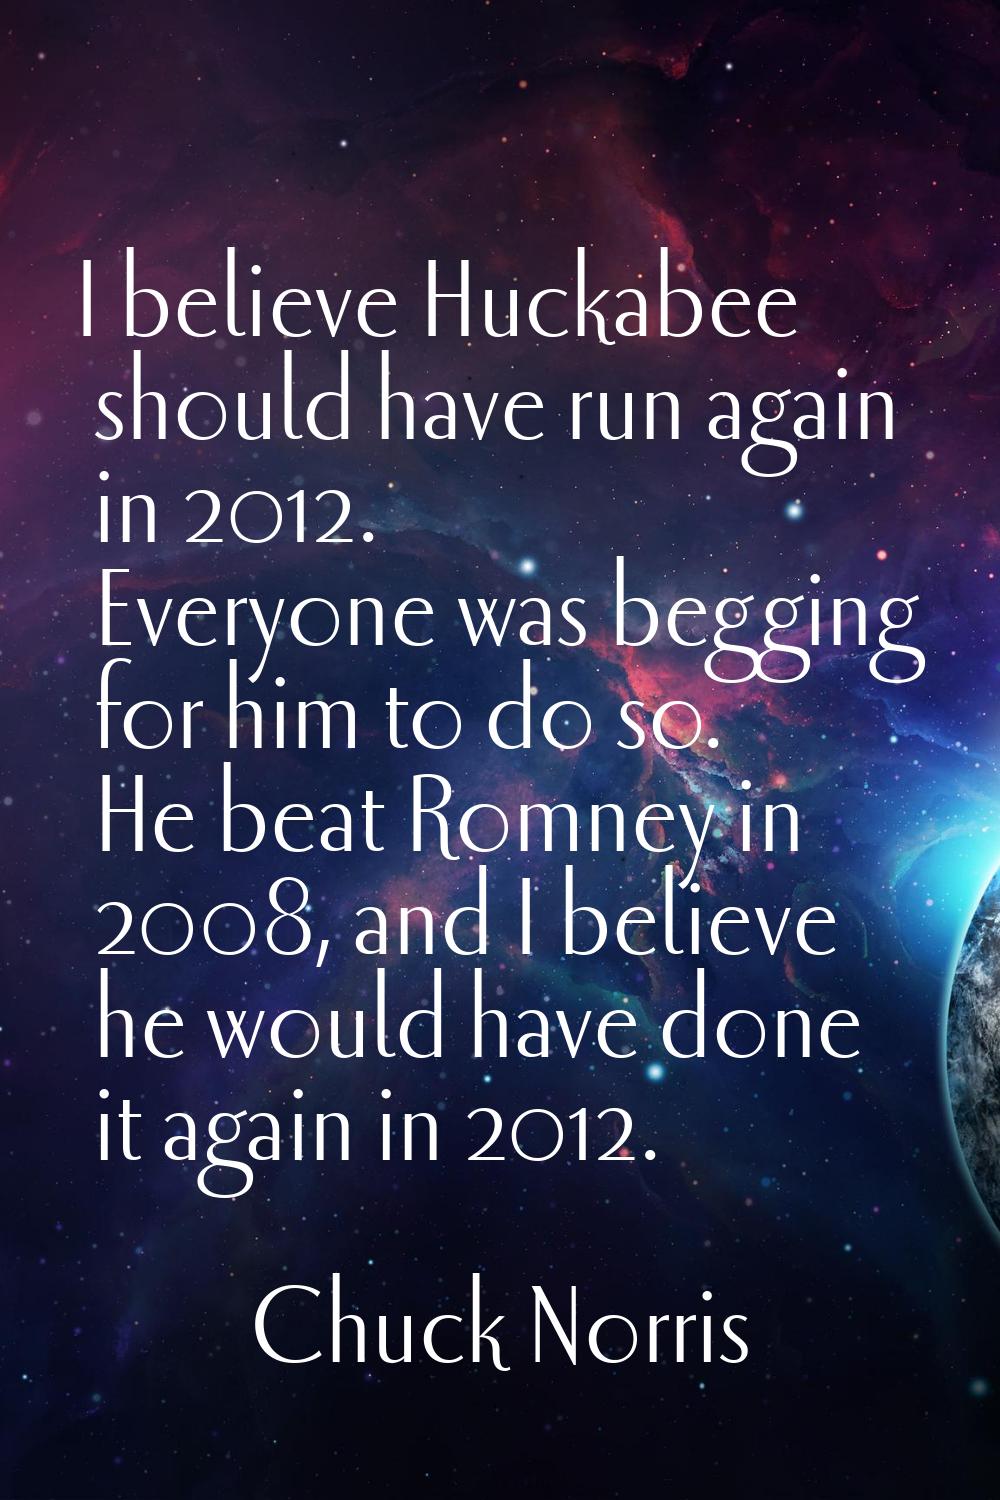 I believe Huckabee should have run again in 2012. Everyone was begging for him to do so. He beat Ro